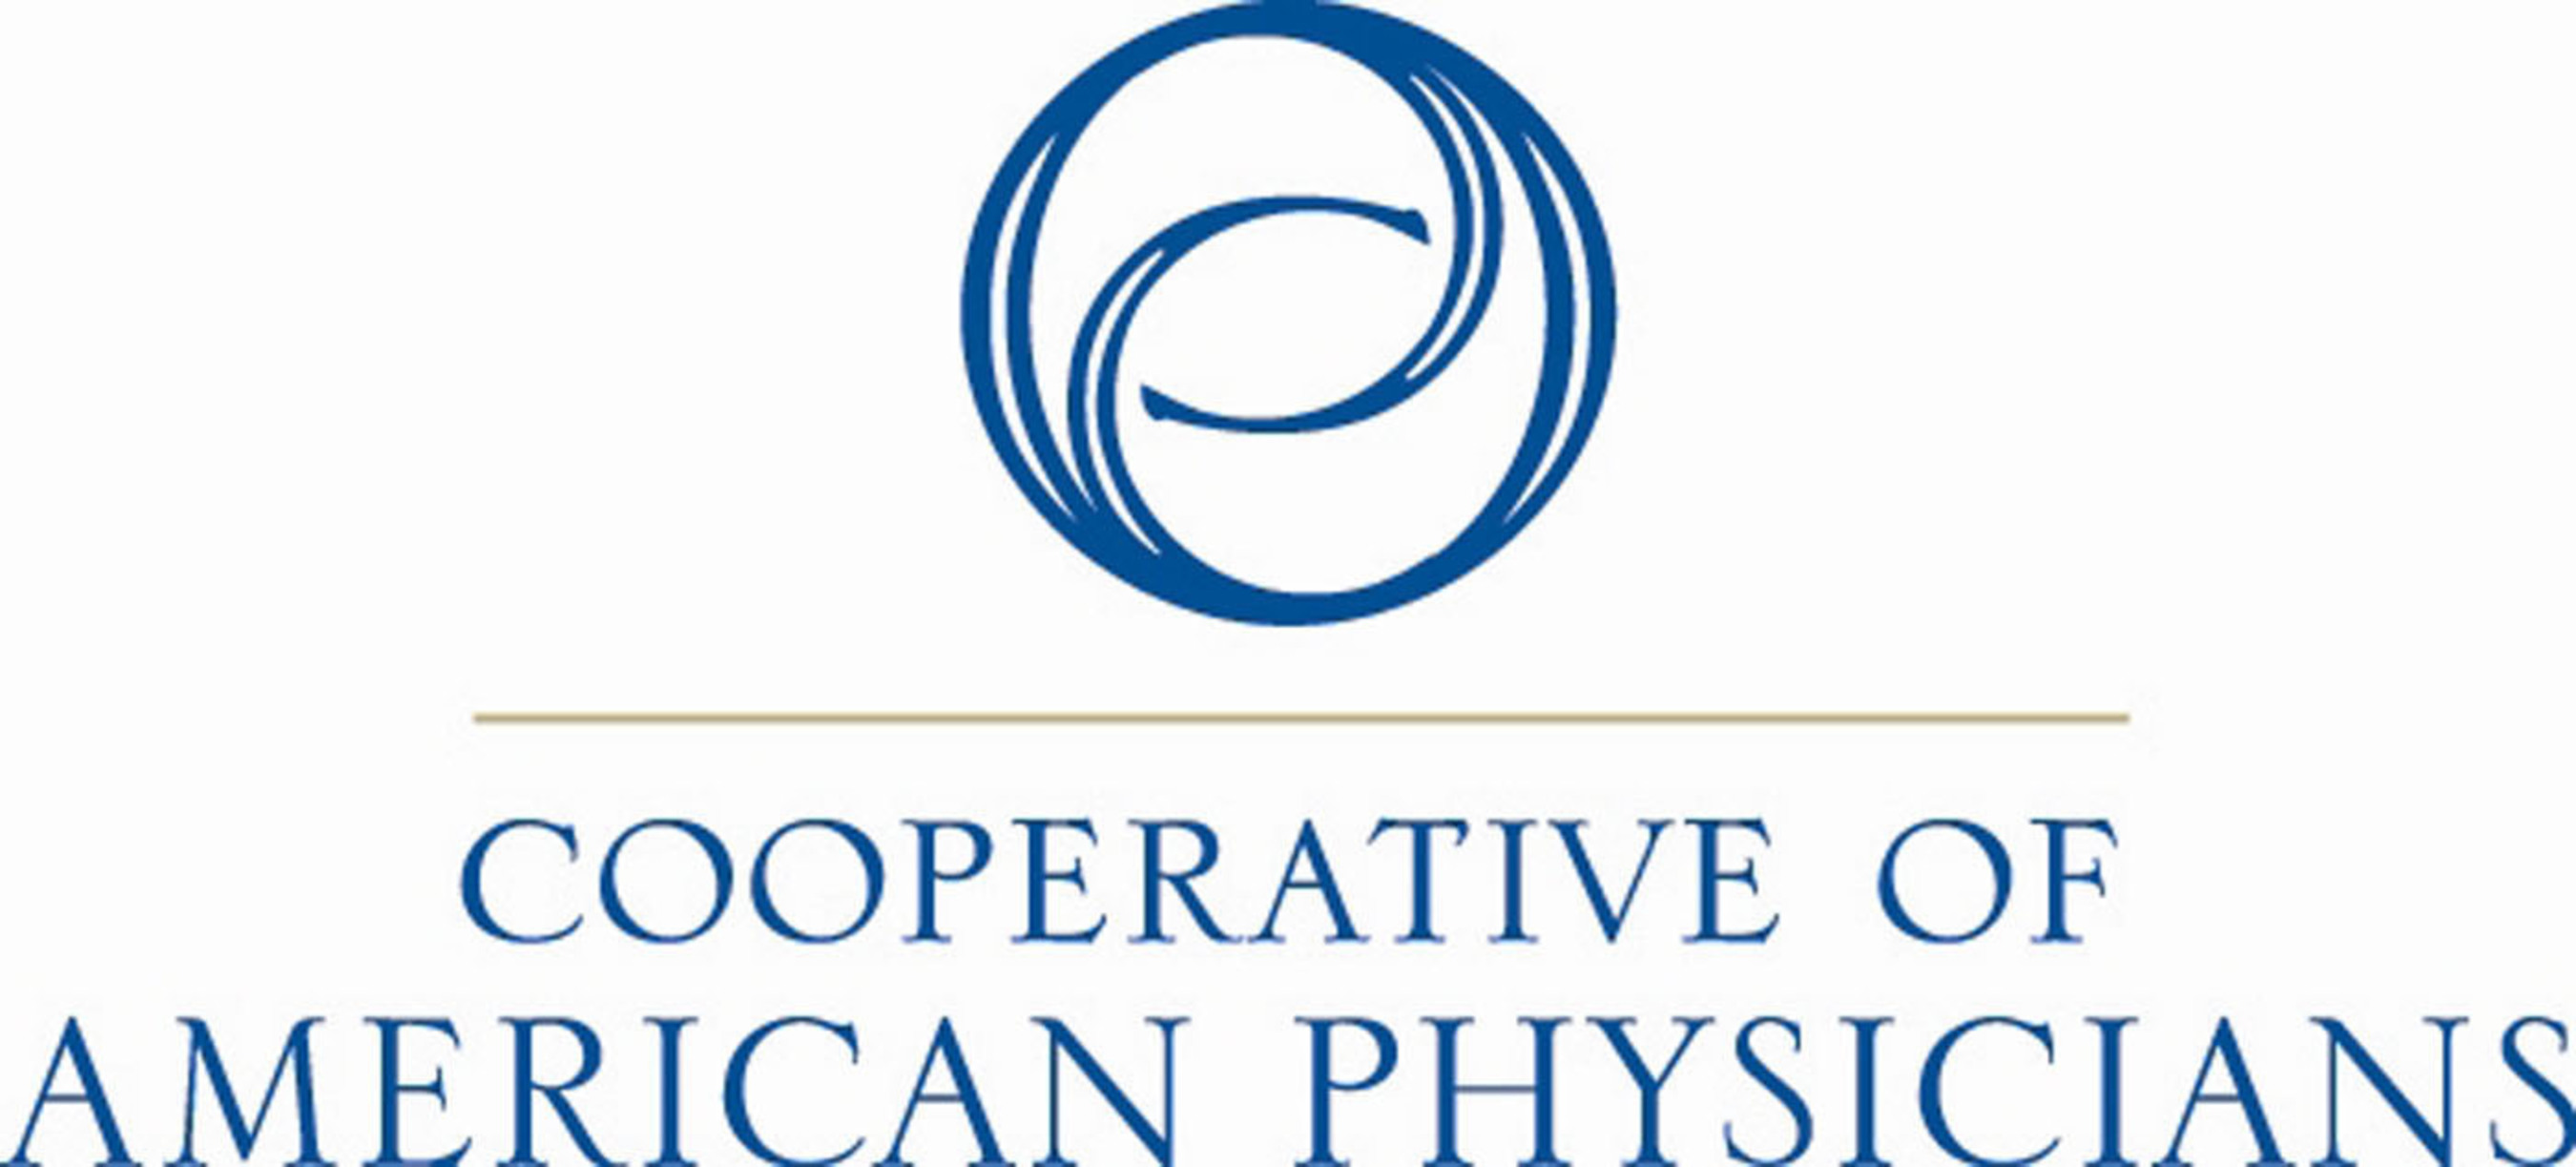 Cooperative of American Physicians, Inc. logo